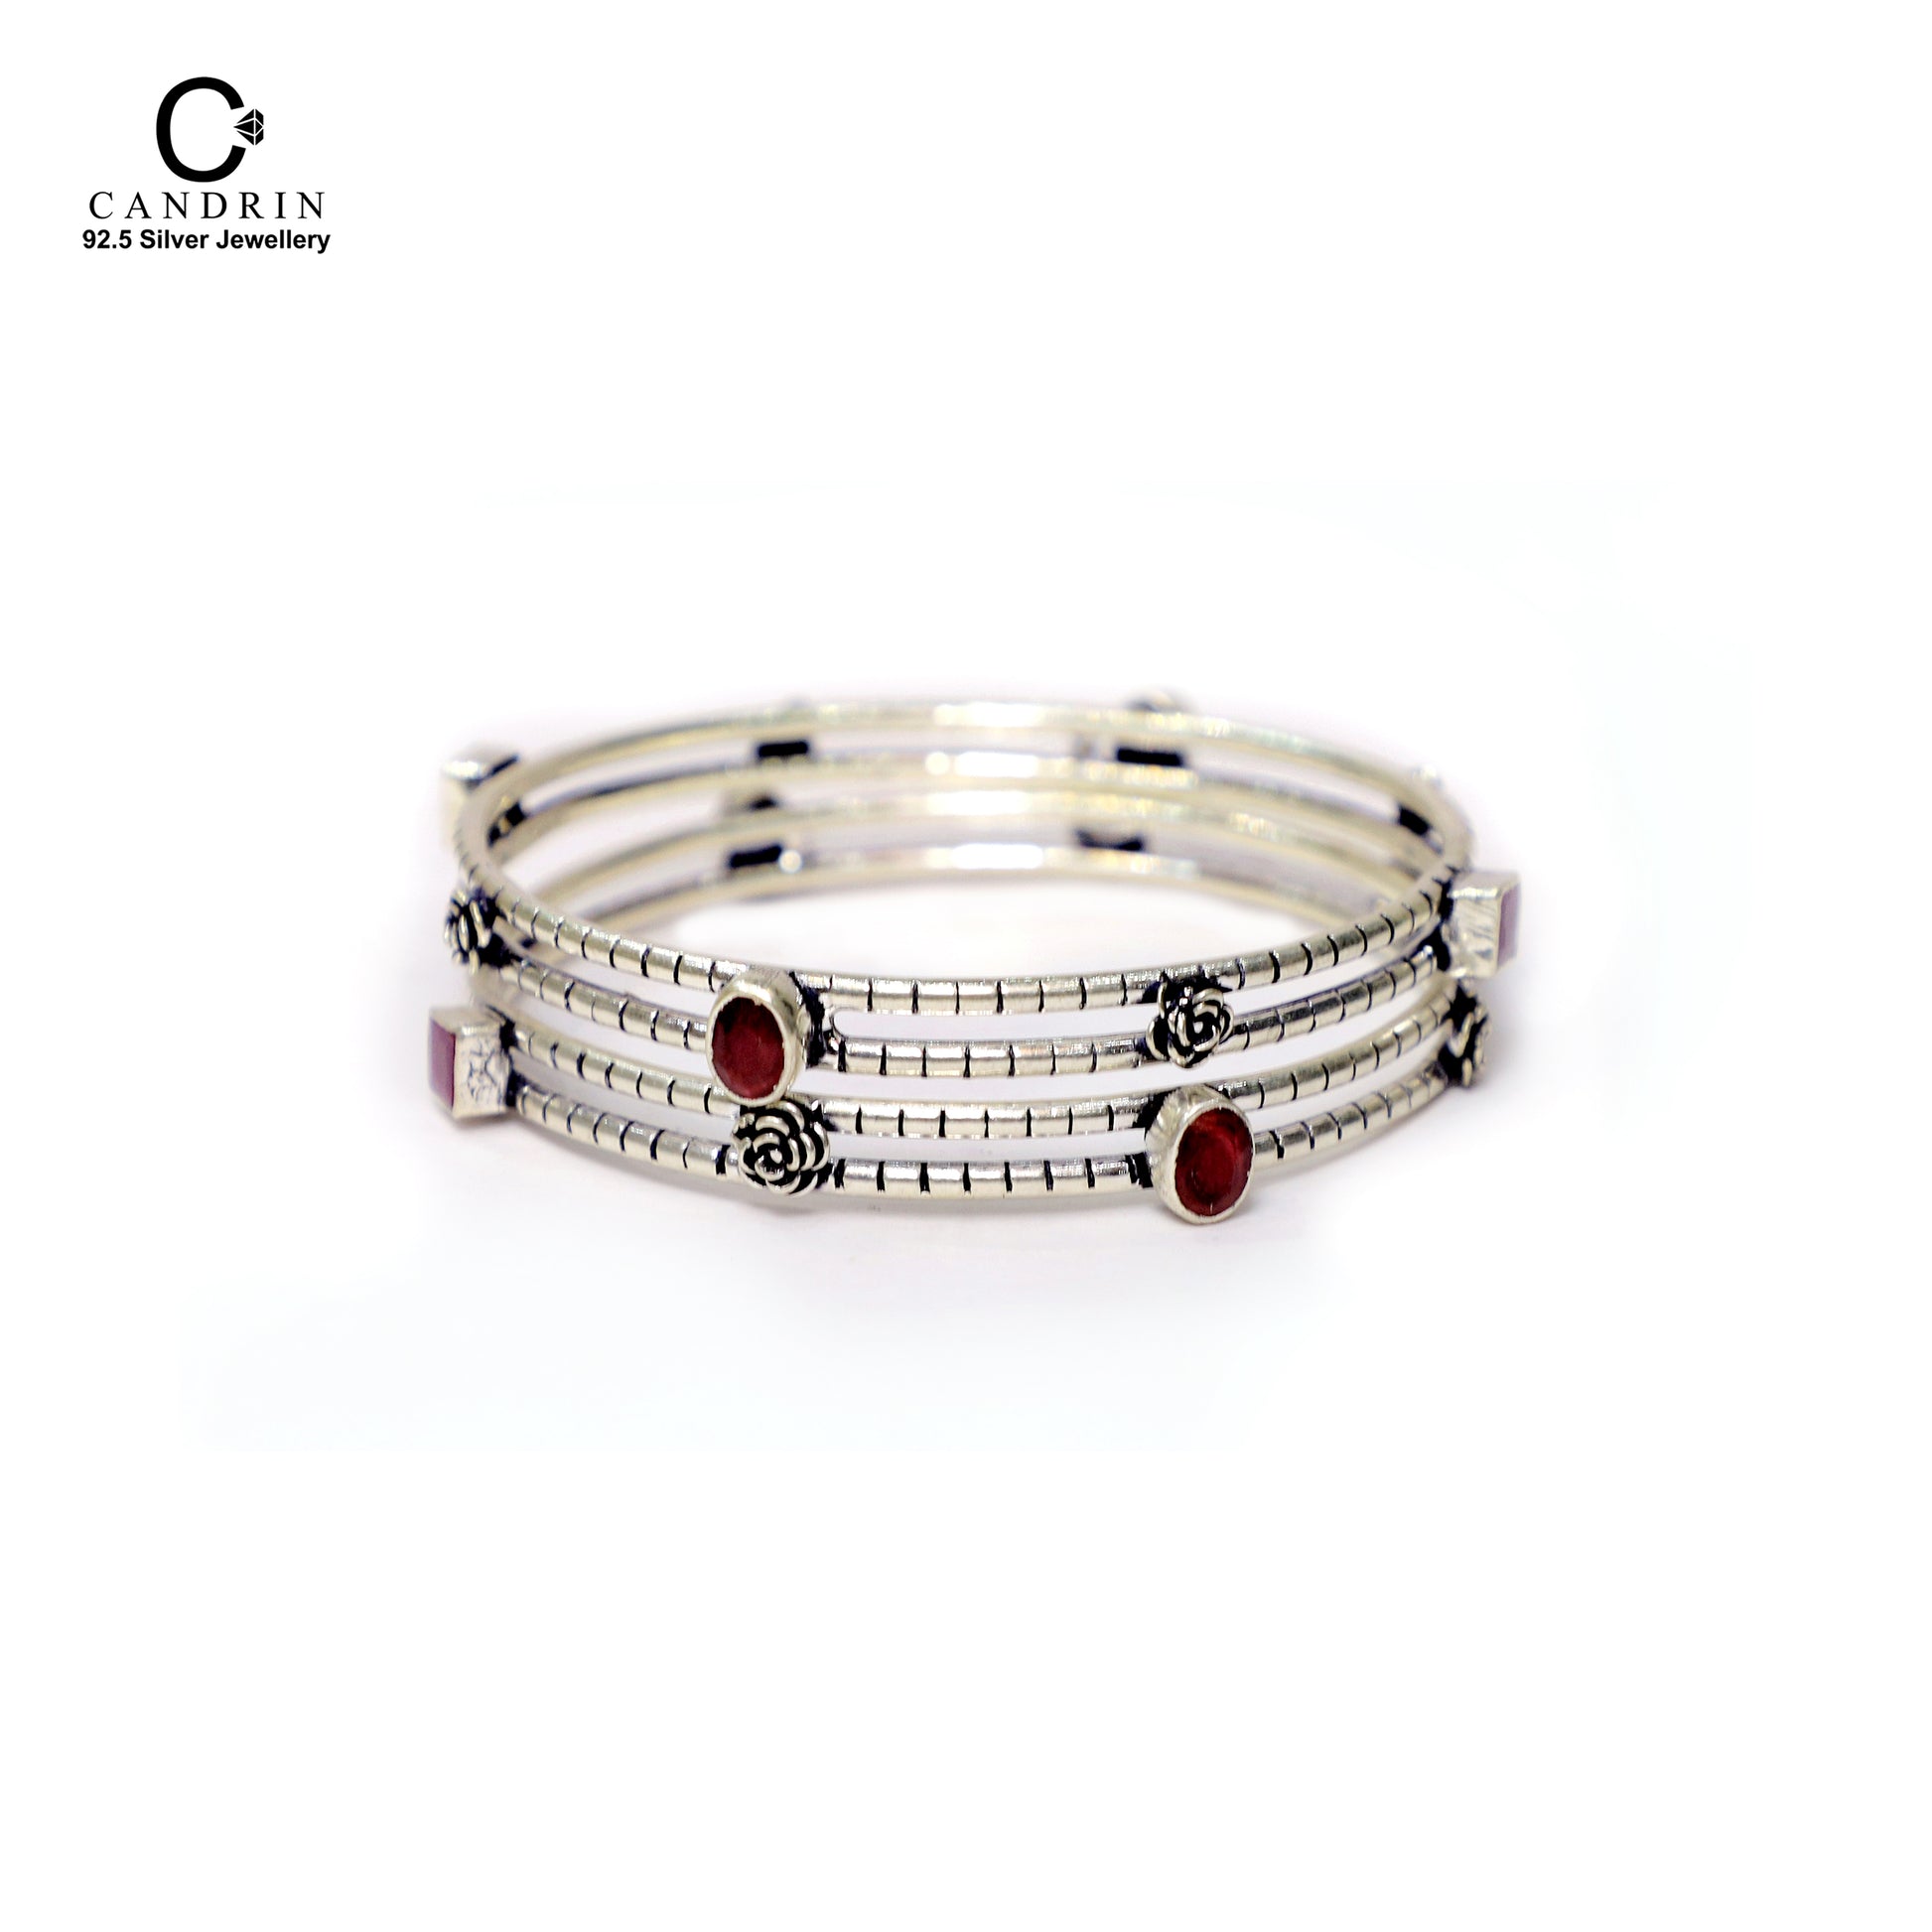 silver jewellery collection / Rose Ruby bangles/ Rose Ruby candrin bangles/ candrin bangles / candrin jewellery